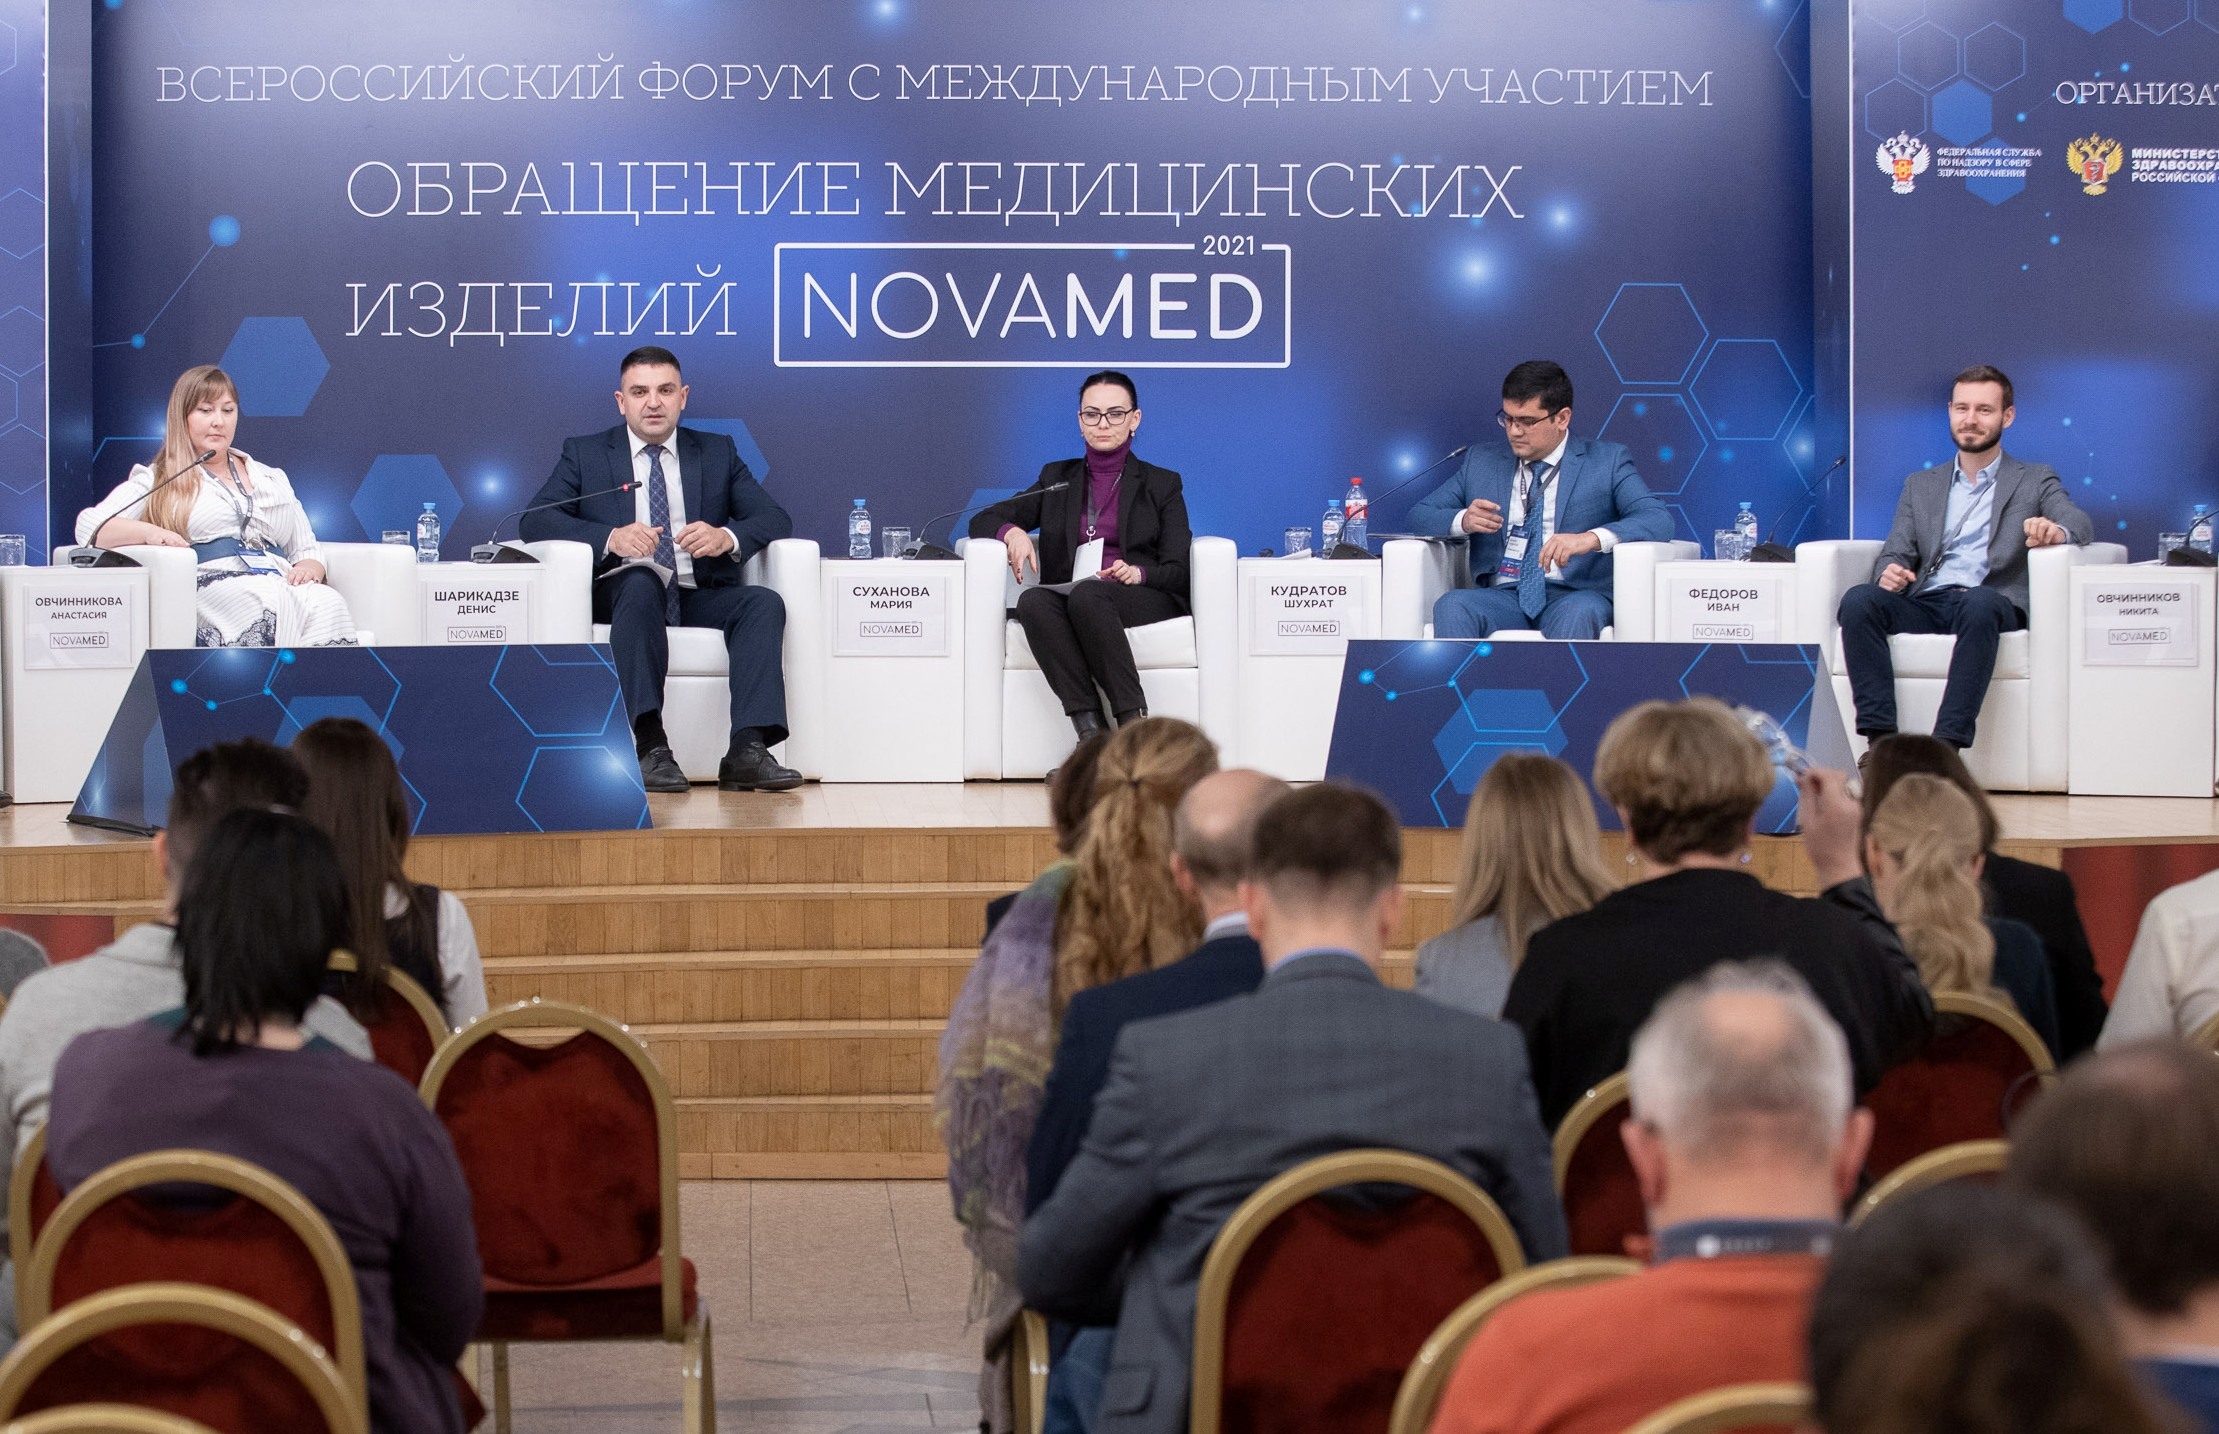 FSUE “Moscow Endocrine Plant” (“Endopharm”) Presented the Experience of Creating an Accredited Testing Laboratory at the NOVAMED-2021 forum